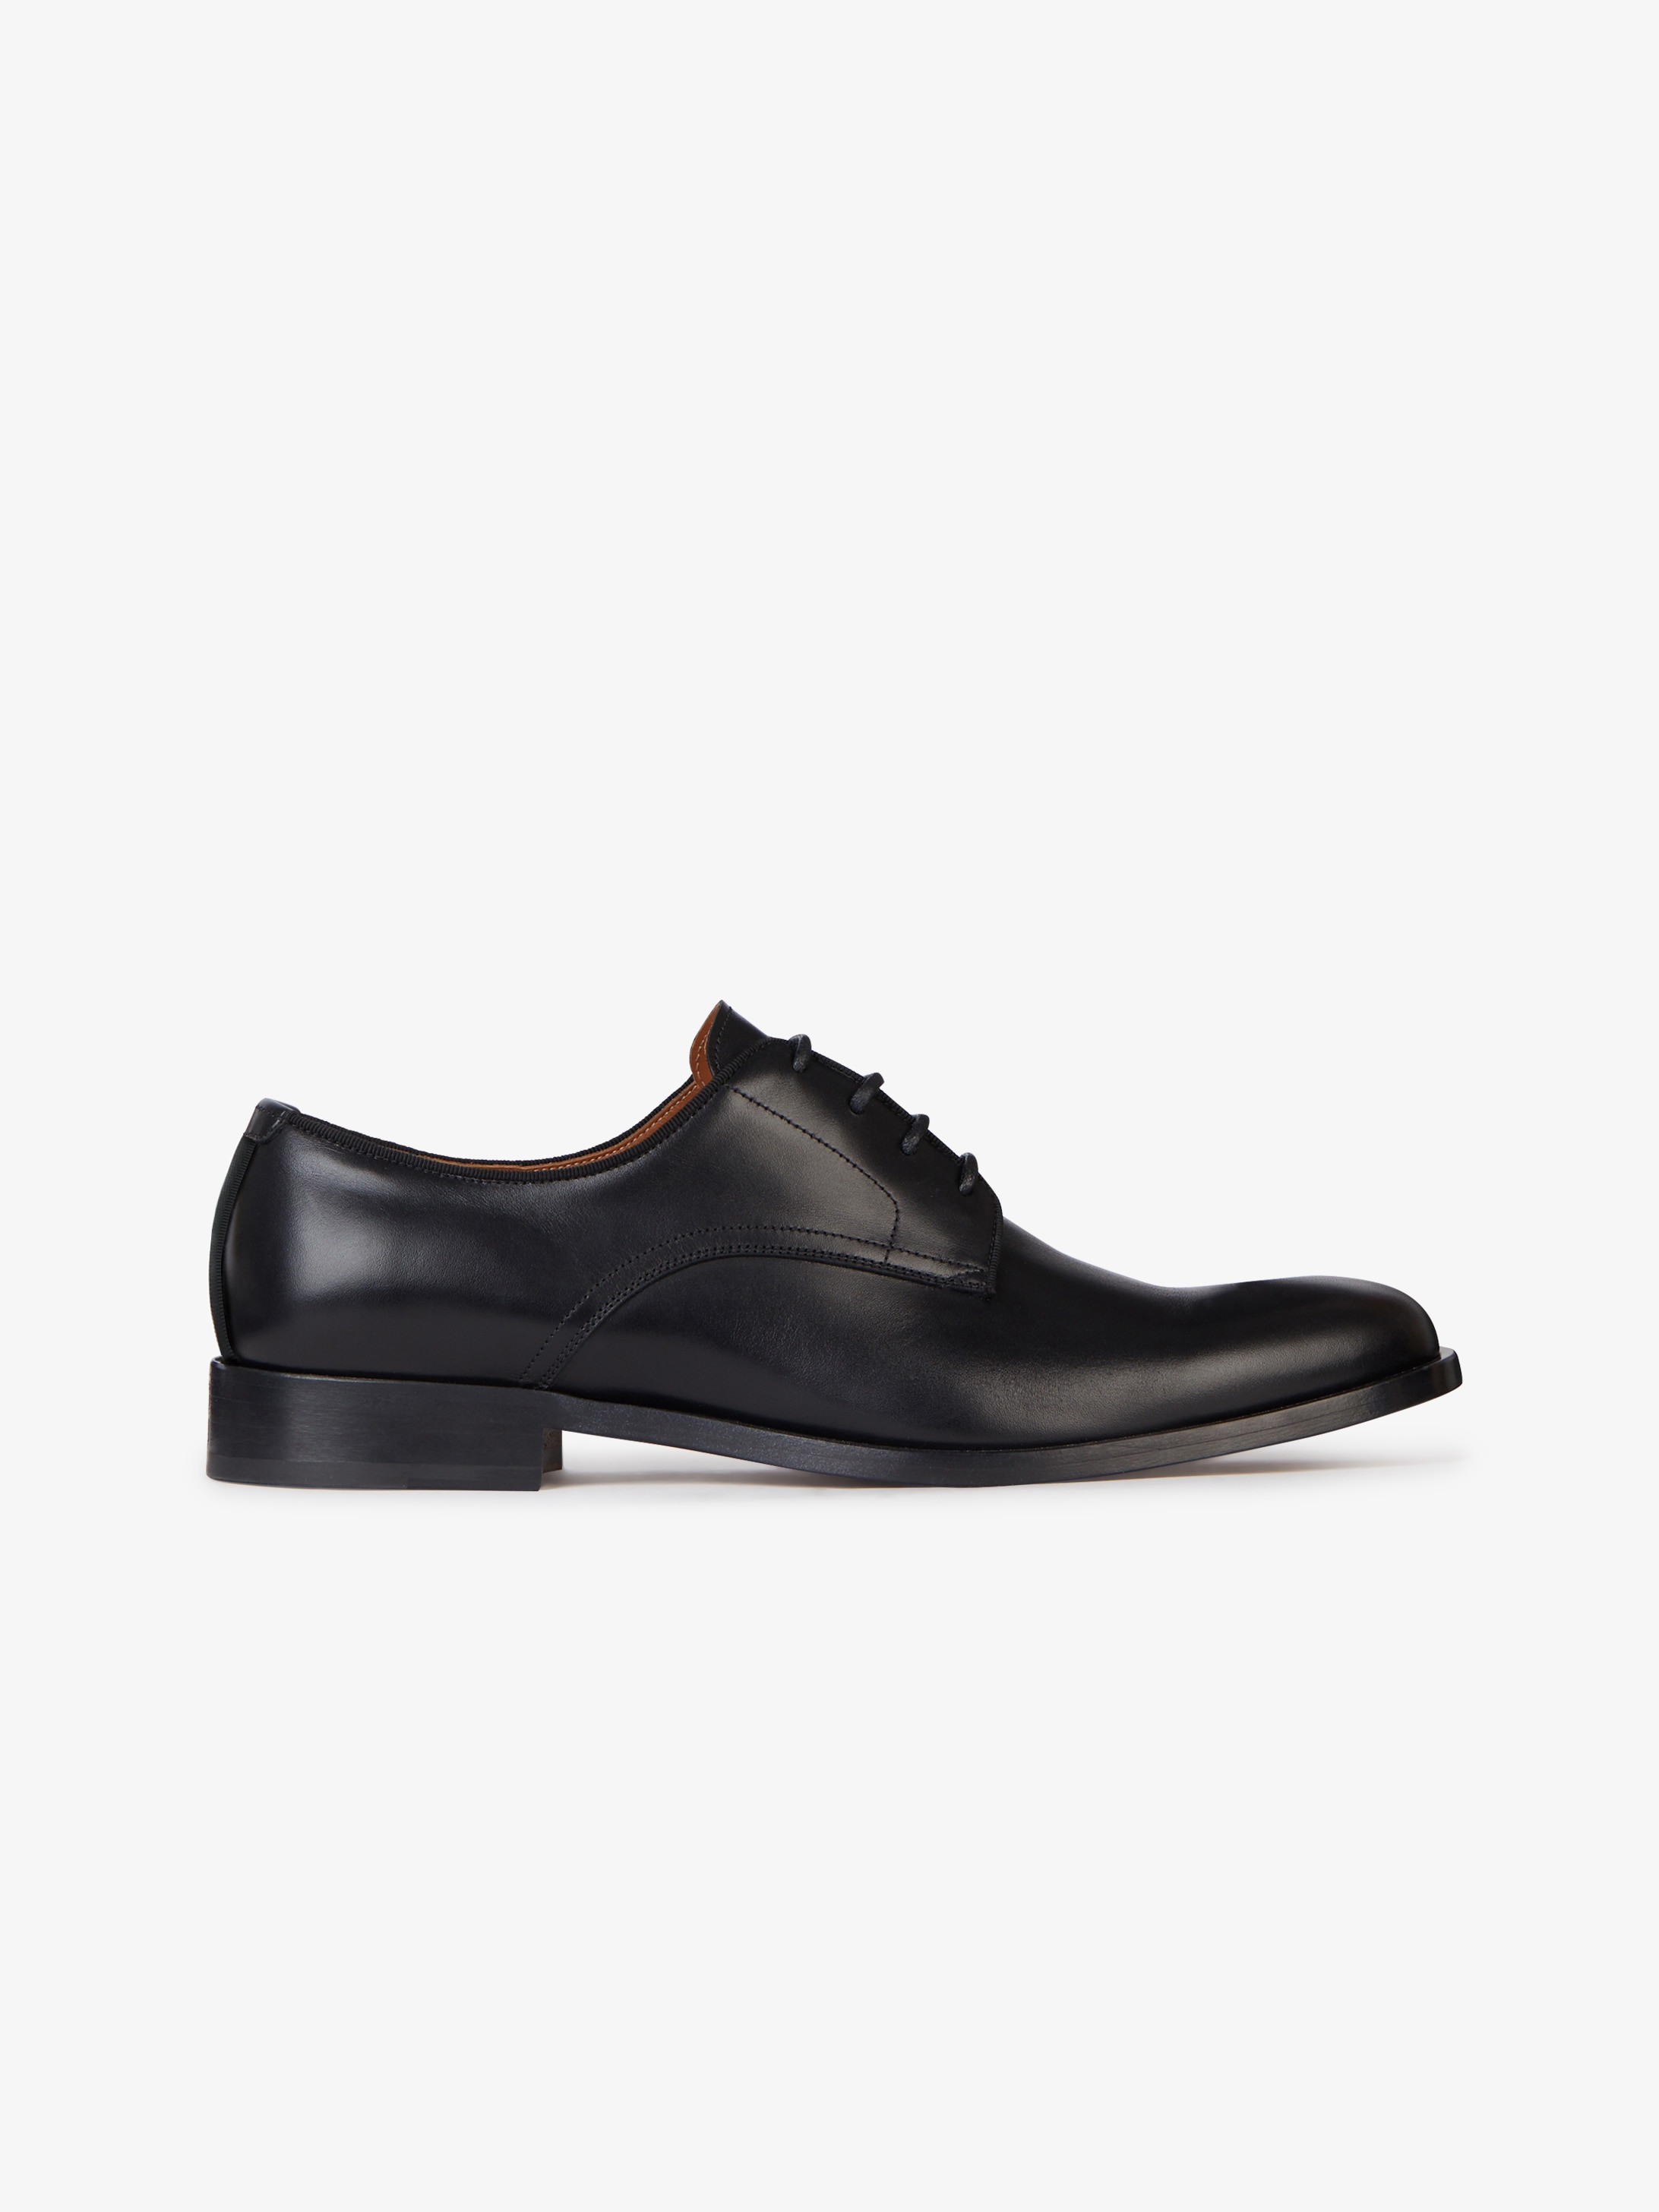 Derby shoes in leather | GIVENCHY Paris